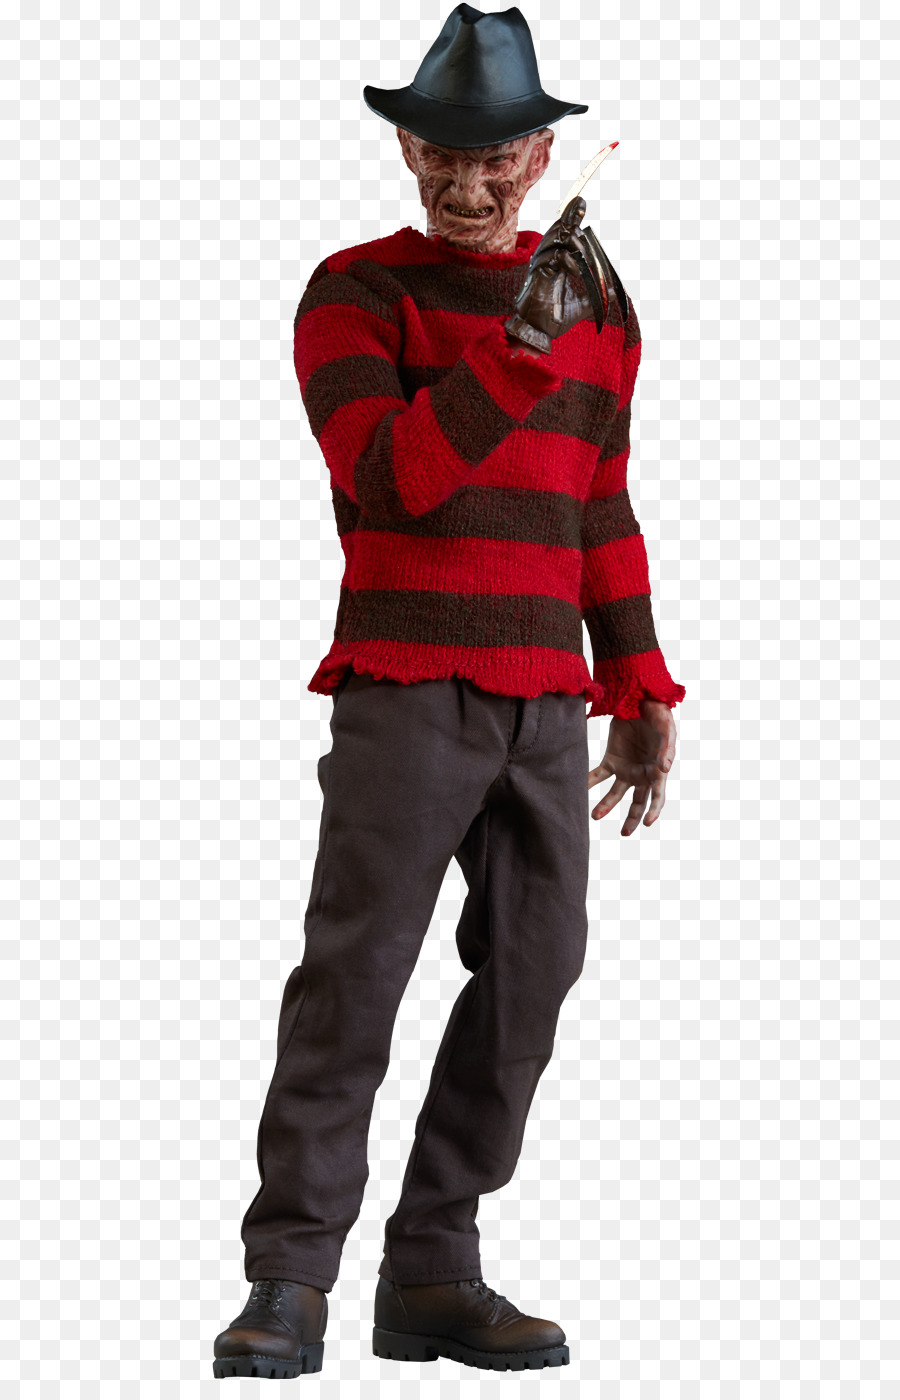 Freddy Krueger Jason Voorhees A Nightmare on Elm Street Action & Toy Figures Sideshow Collectibles - others png download - 480*1385 - Free Transparent Freddy Krueger png Download.